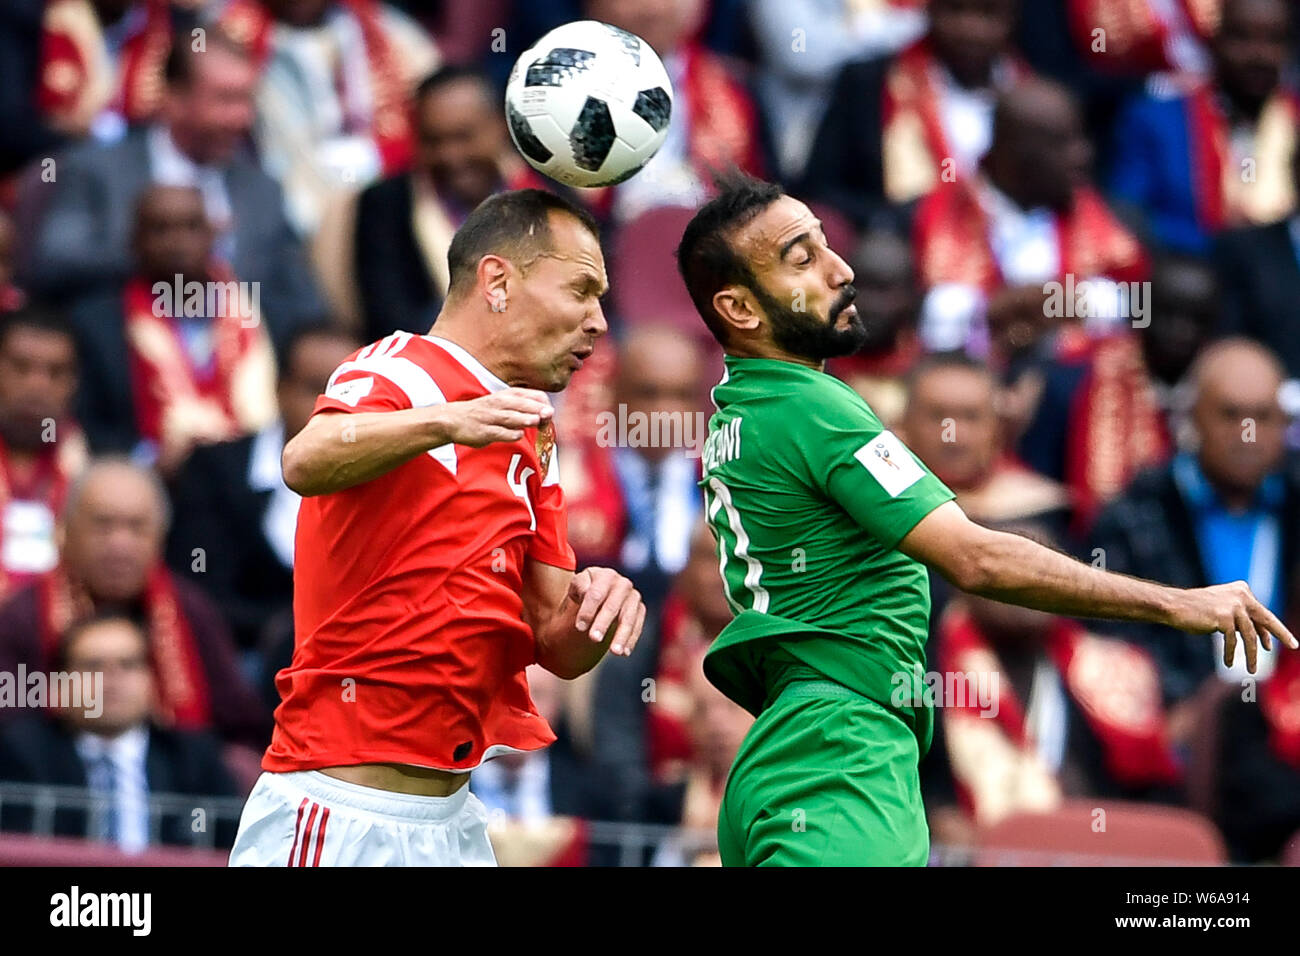 A player of Russia, left, heads the ball against Mohammad Al-Sahlawi of Saudi Arabia in their Group A match during the 2018 FIFA World Cup in Moscow, Stock Photo